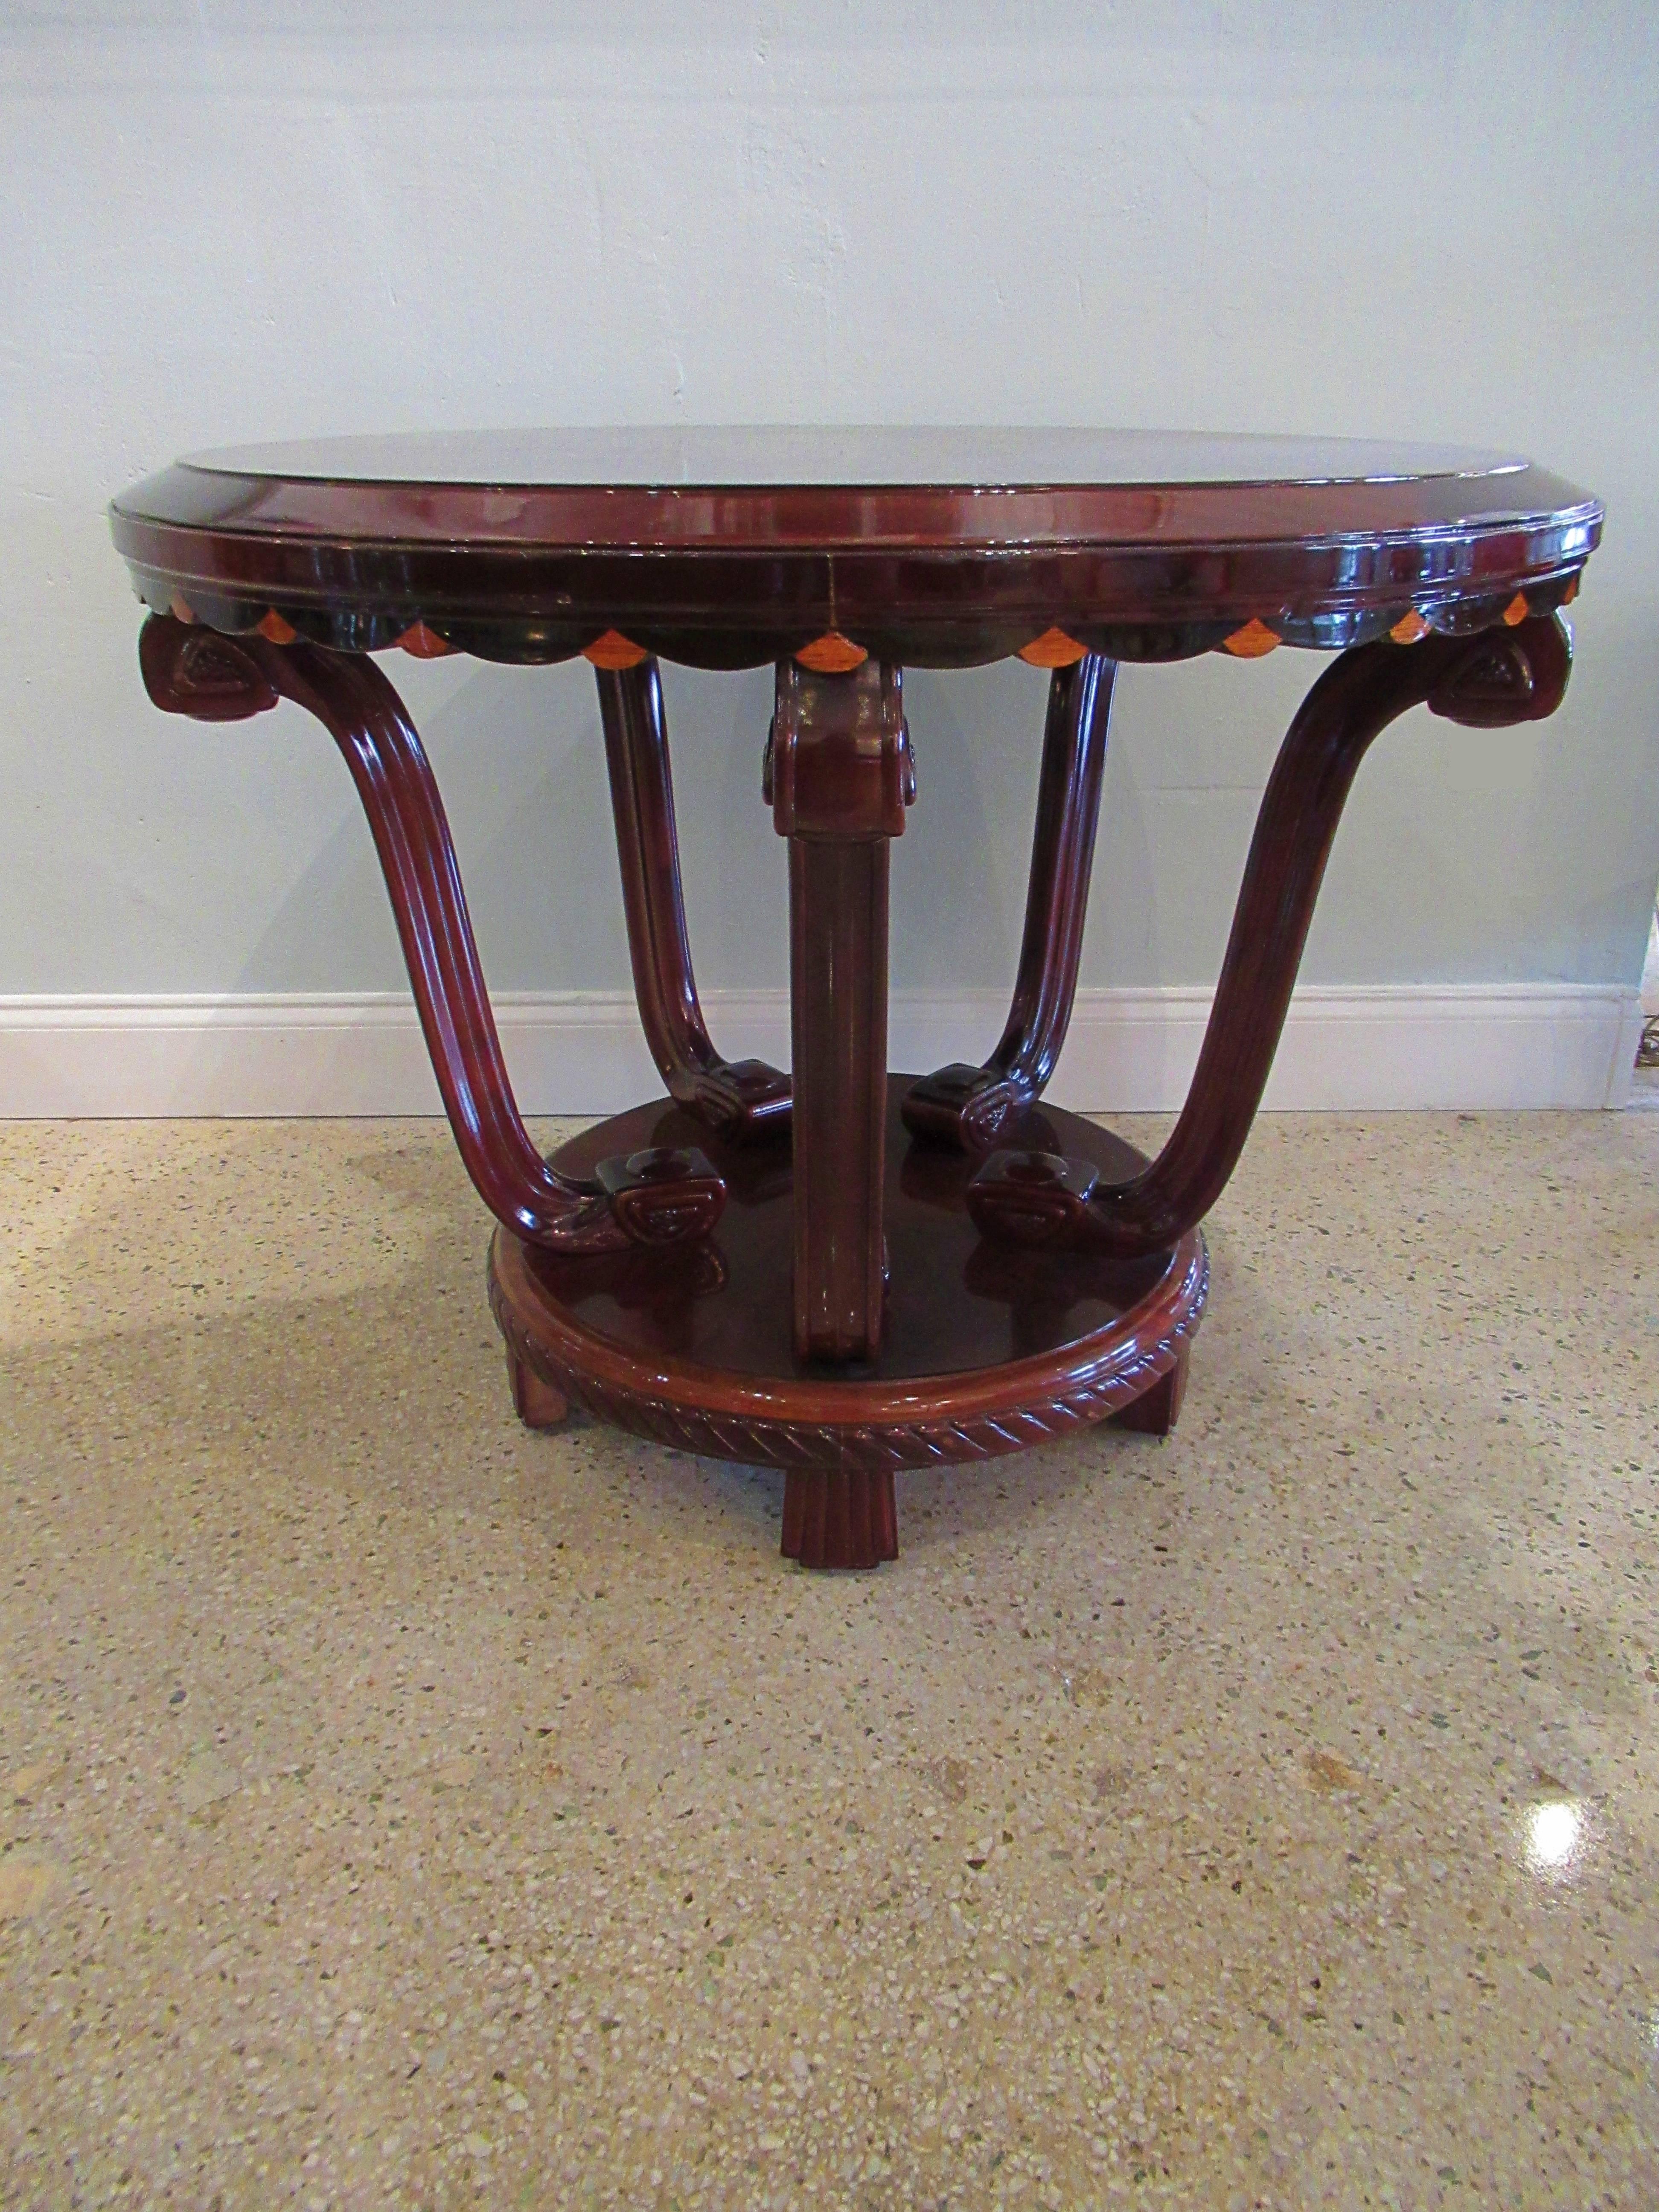 The circular top with spectacular radial veneer, the frieze with scalloped edge inlaid with lemonwood lozenge, on four curved and carved legs, meeting on a central circular base, radially veneered with a circle in the center, the frieze of the base